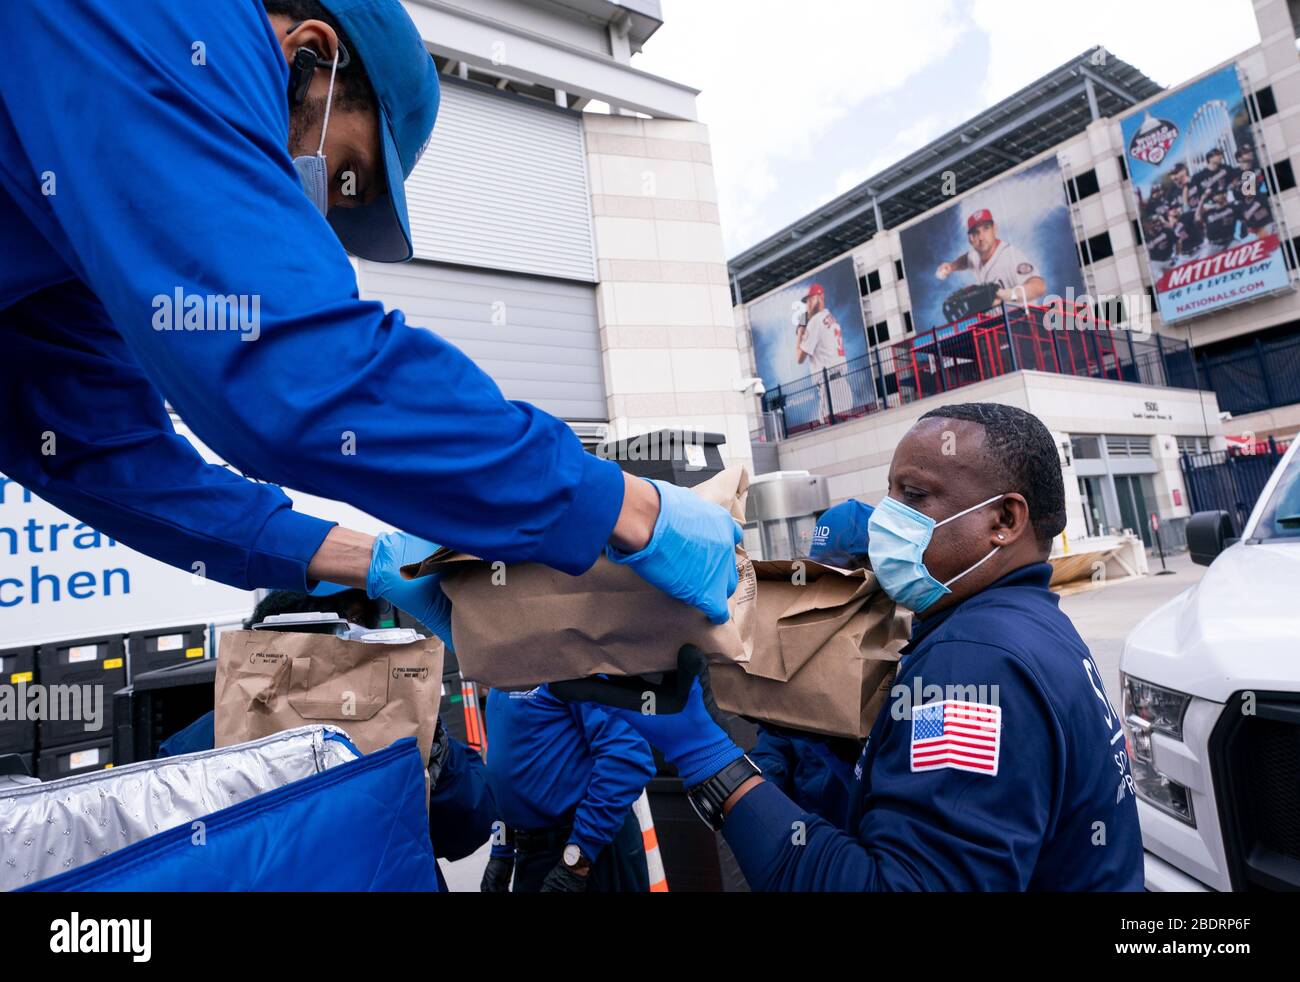 Washington, United States. 09th Apr, 2020. Workers with the nonprofit group SWBID pick up food to distribute to those in need from World Central Kitchen's makeshift distribution site at Nationals Park in Washington, DC on Thursday, April 9, 2020. Jose Andres's World Central Kitchen is using Nationals Park to prepare and distribute food to agencies that help needed individuals during the Coronavirus pandemic. Photo by Kevin Dietsch/UPI Credit: UPI/Alamy Live News Stock Photo